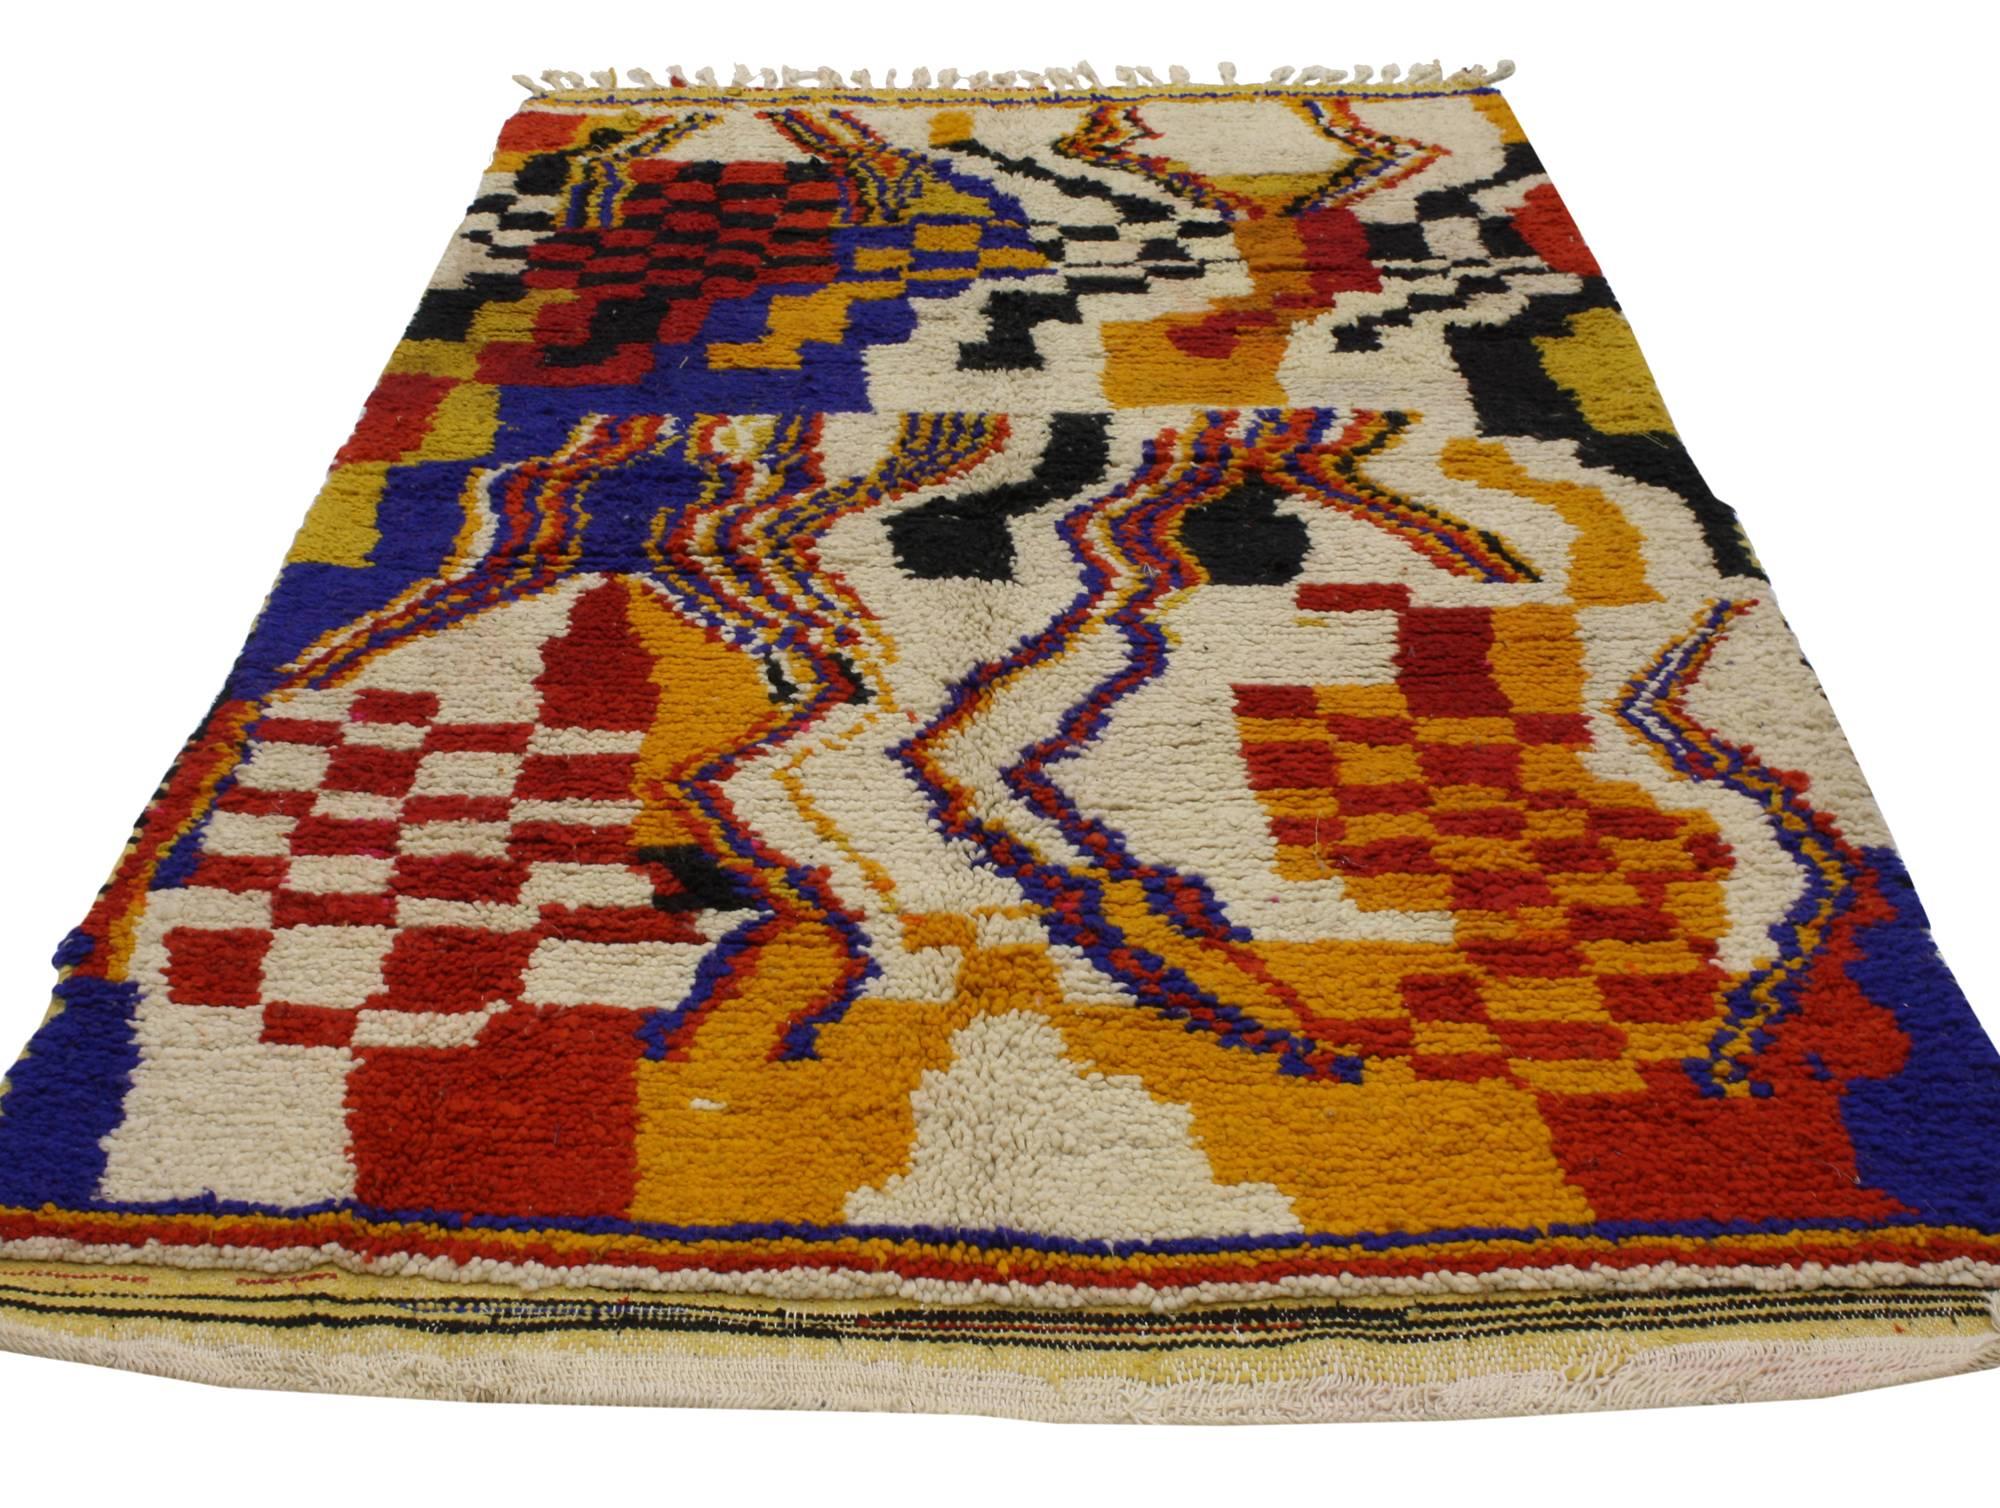 20446 Vintage Berber Moroccan Azilal Rug with Cubism Design and Post-Modern Style. The subtlety of a cream colored background used to ornament the Berber Moroccan Azilal rug strikingly contrast with the poly-chromatic cubes of the field. A myriad of